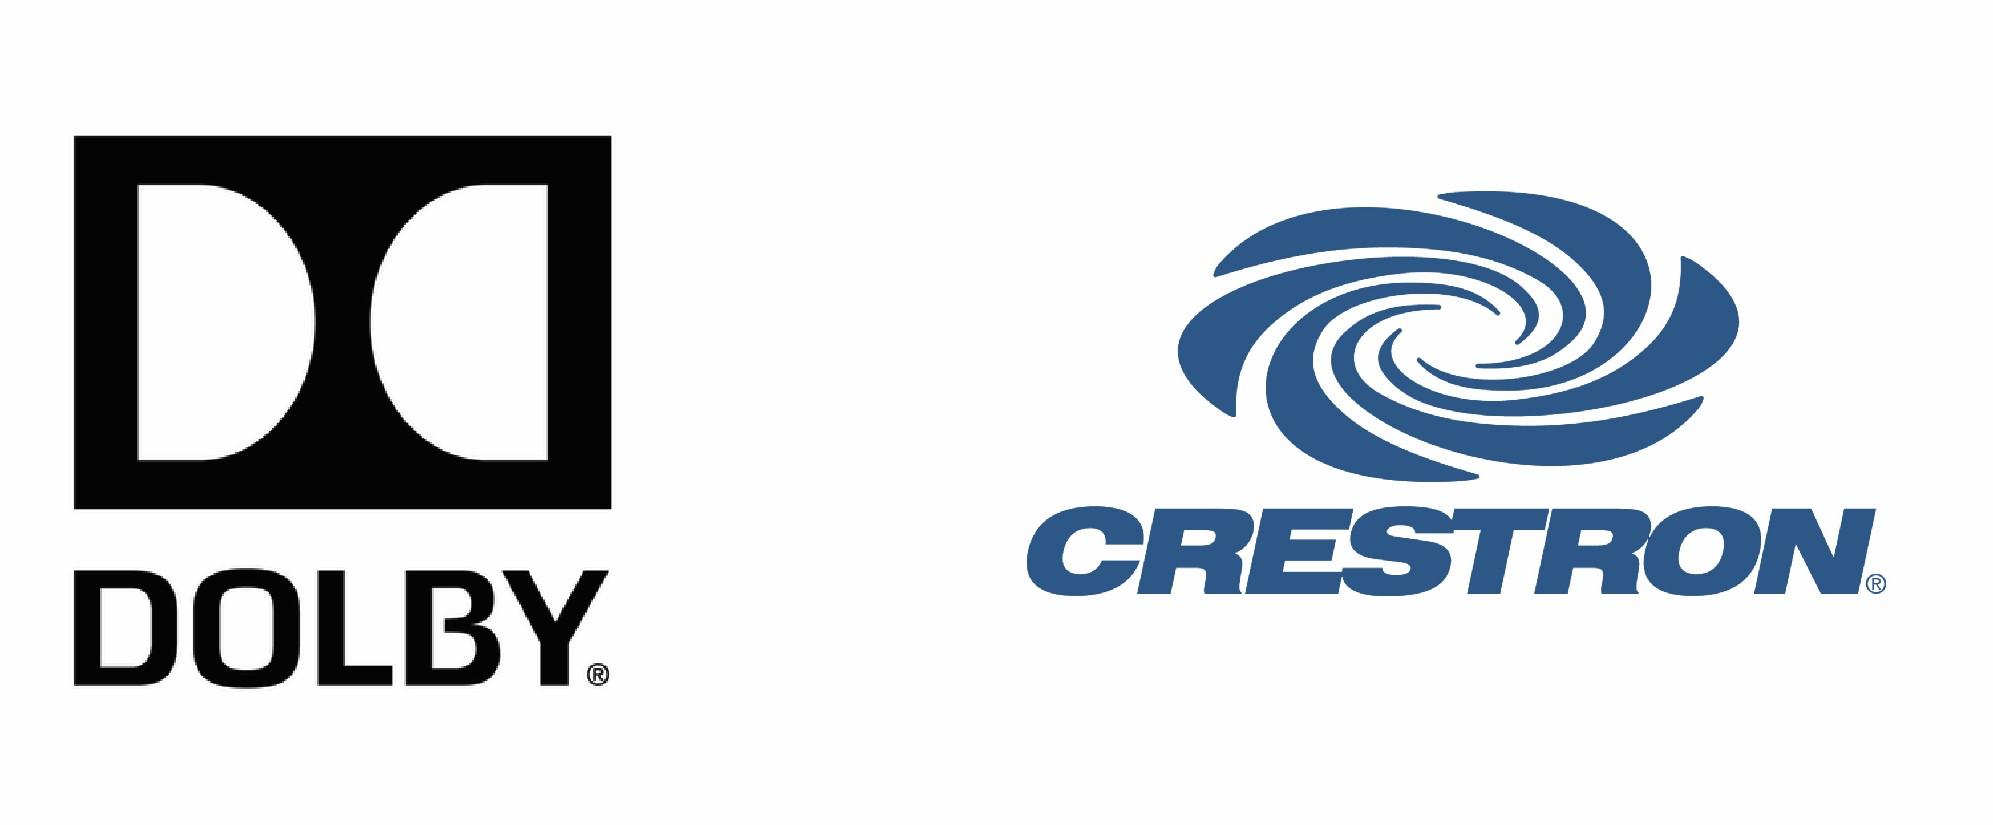 Dolby & Crestron